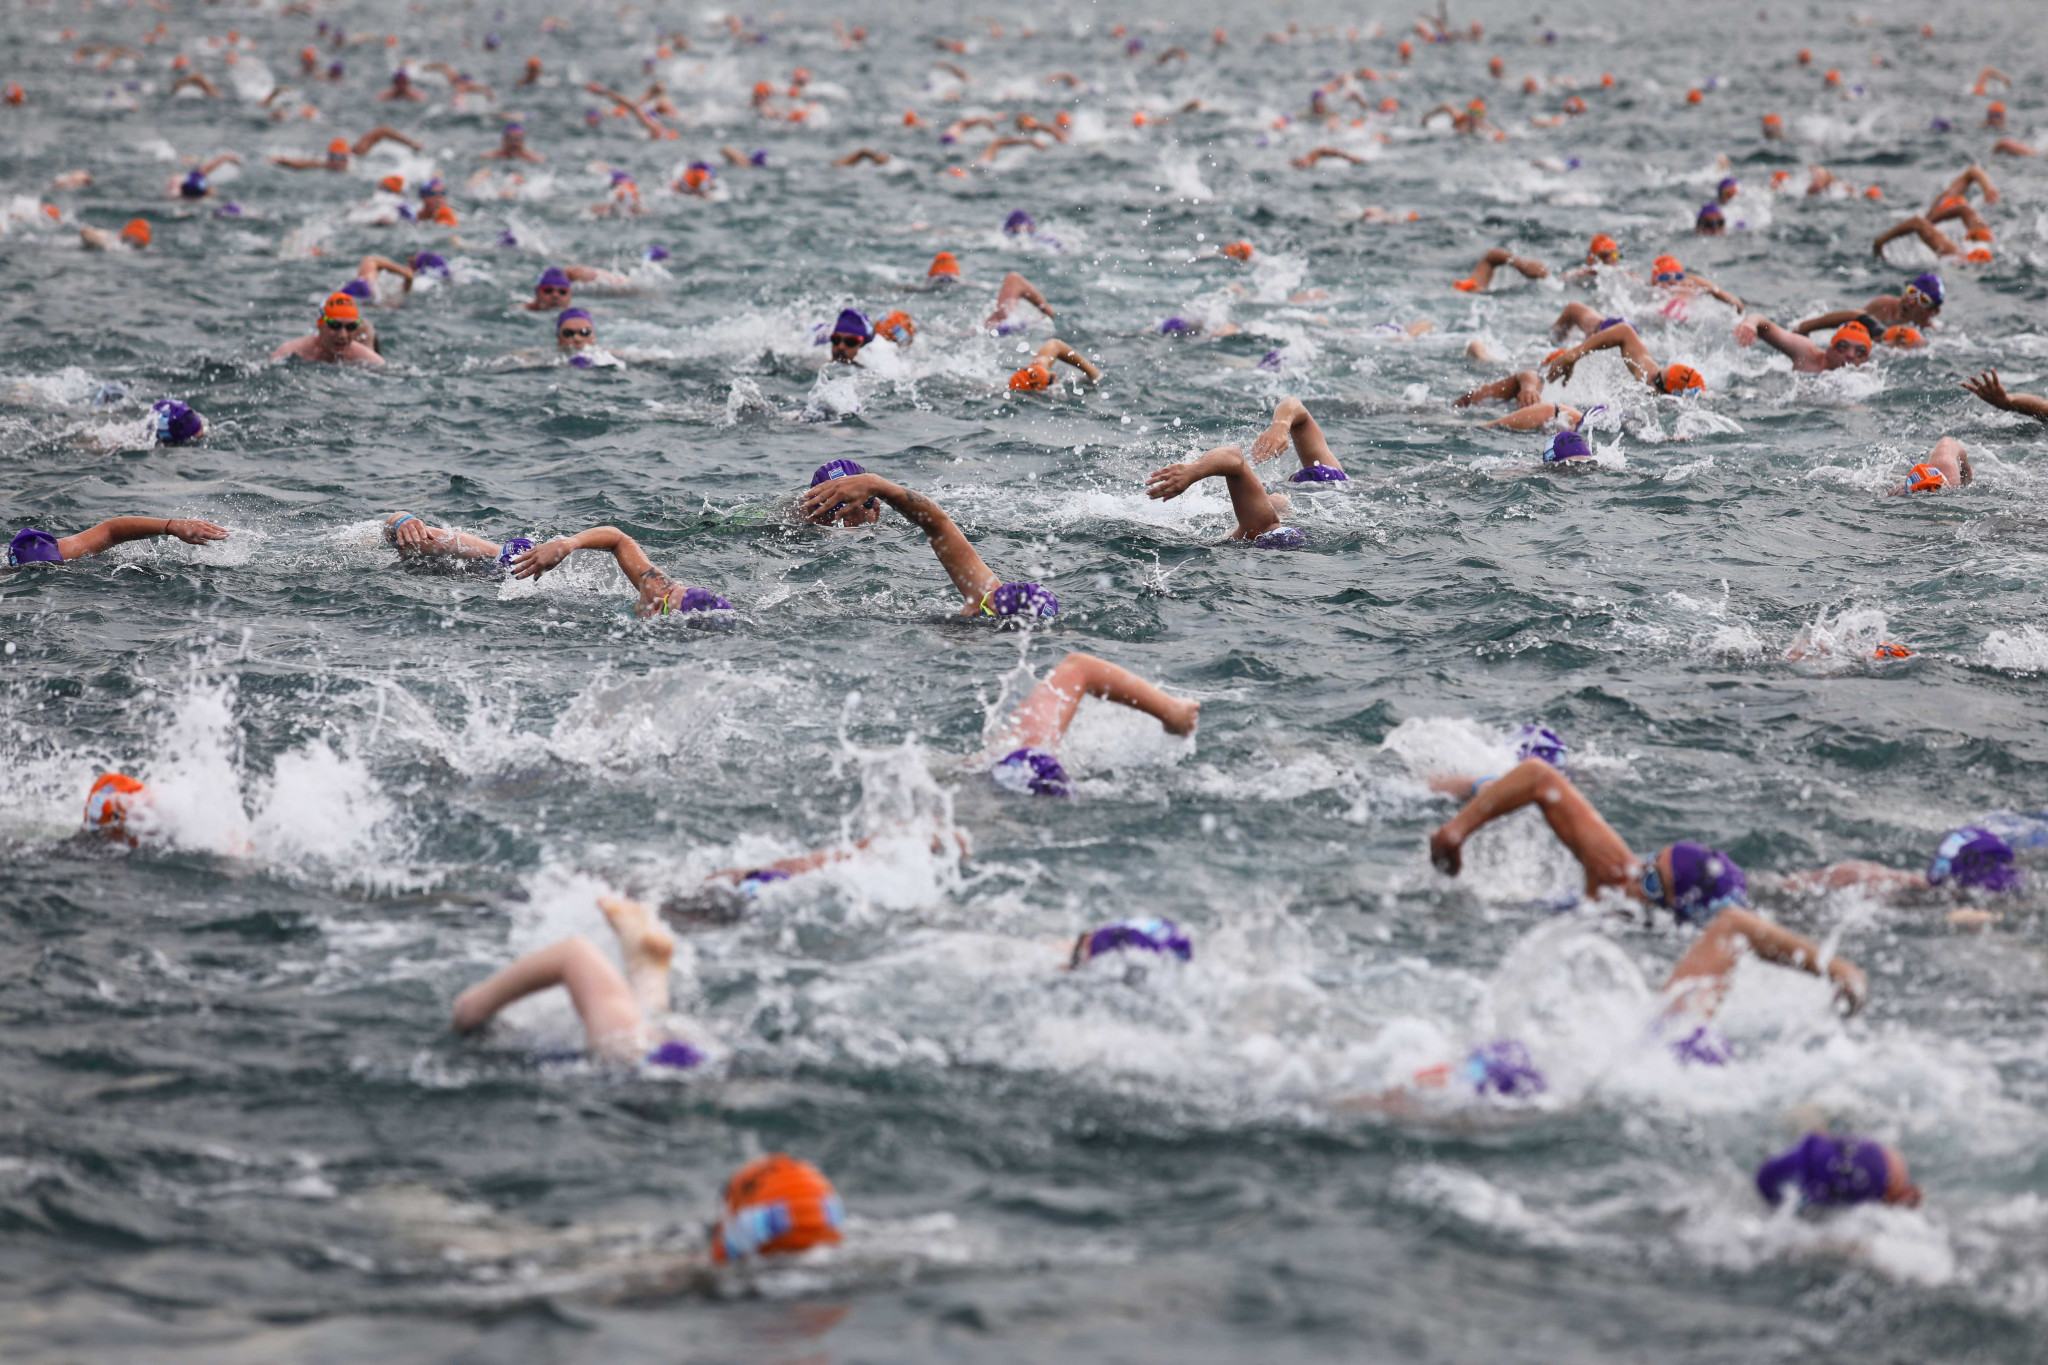 Turkish Olympic Committee reveal international quota for 2019 Cross-Continental Swimming Race filled in 28 minutes